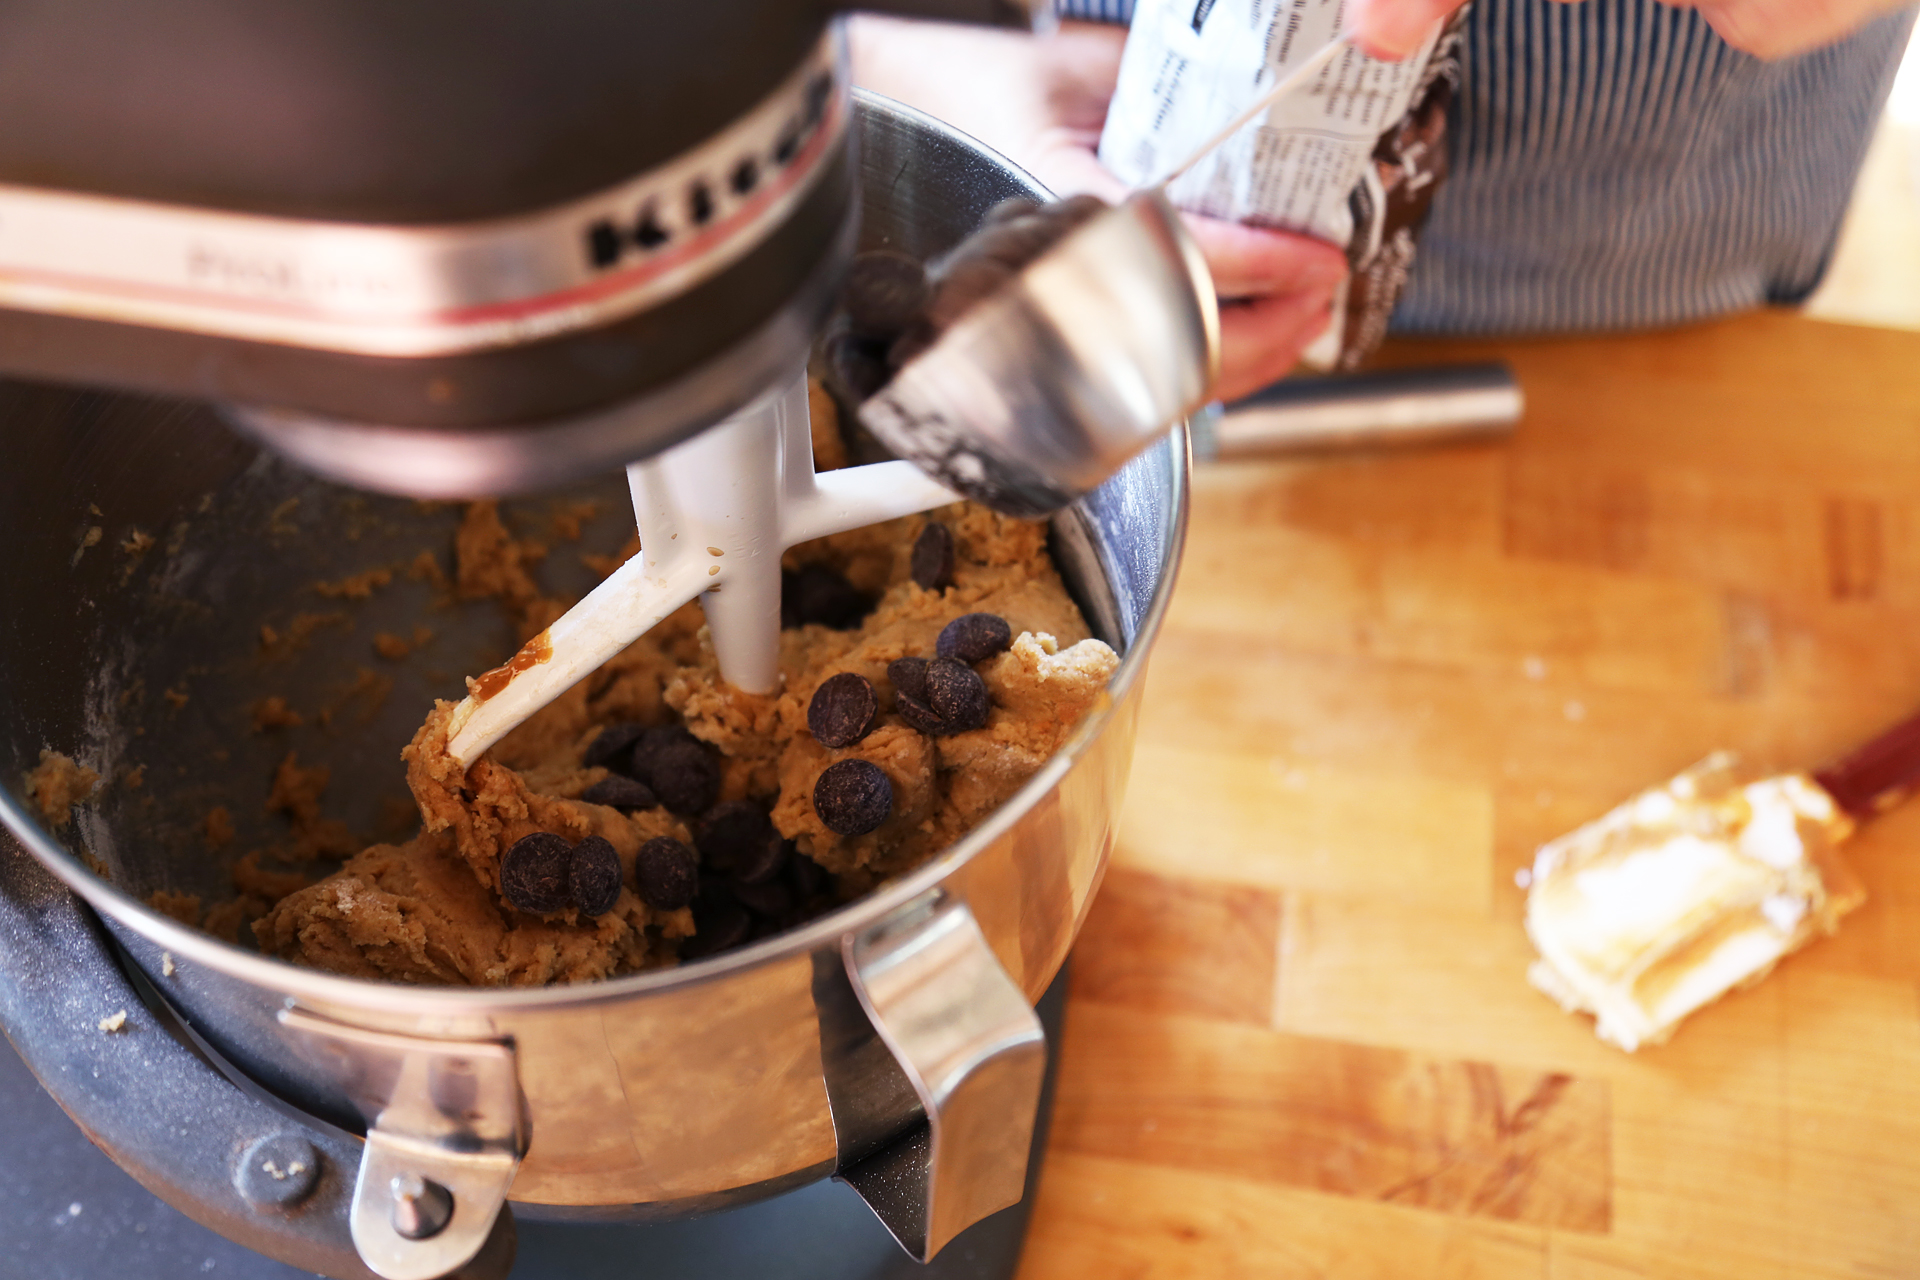 Add the chocolate chips and beat until combined.